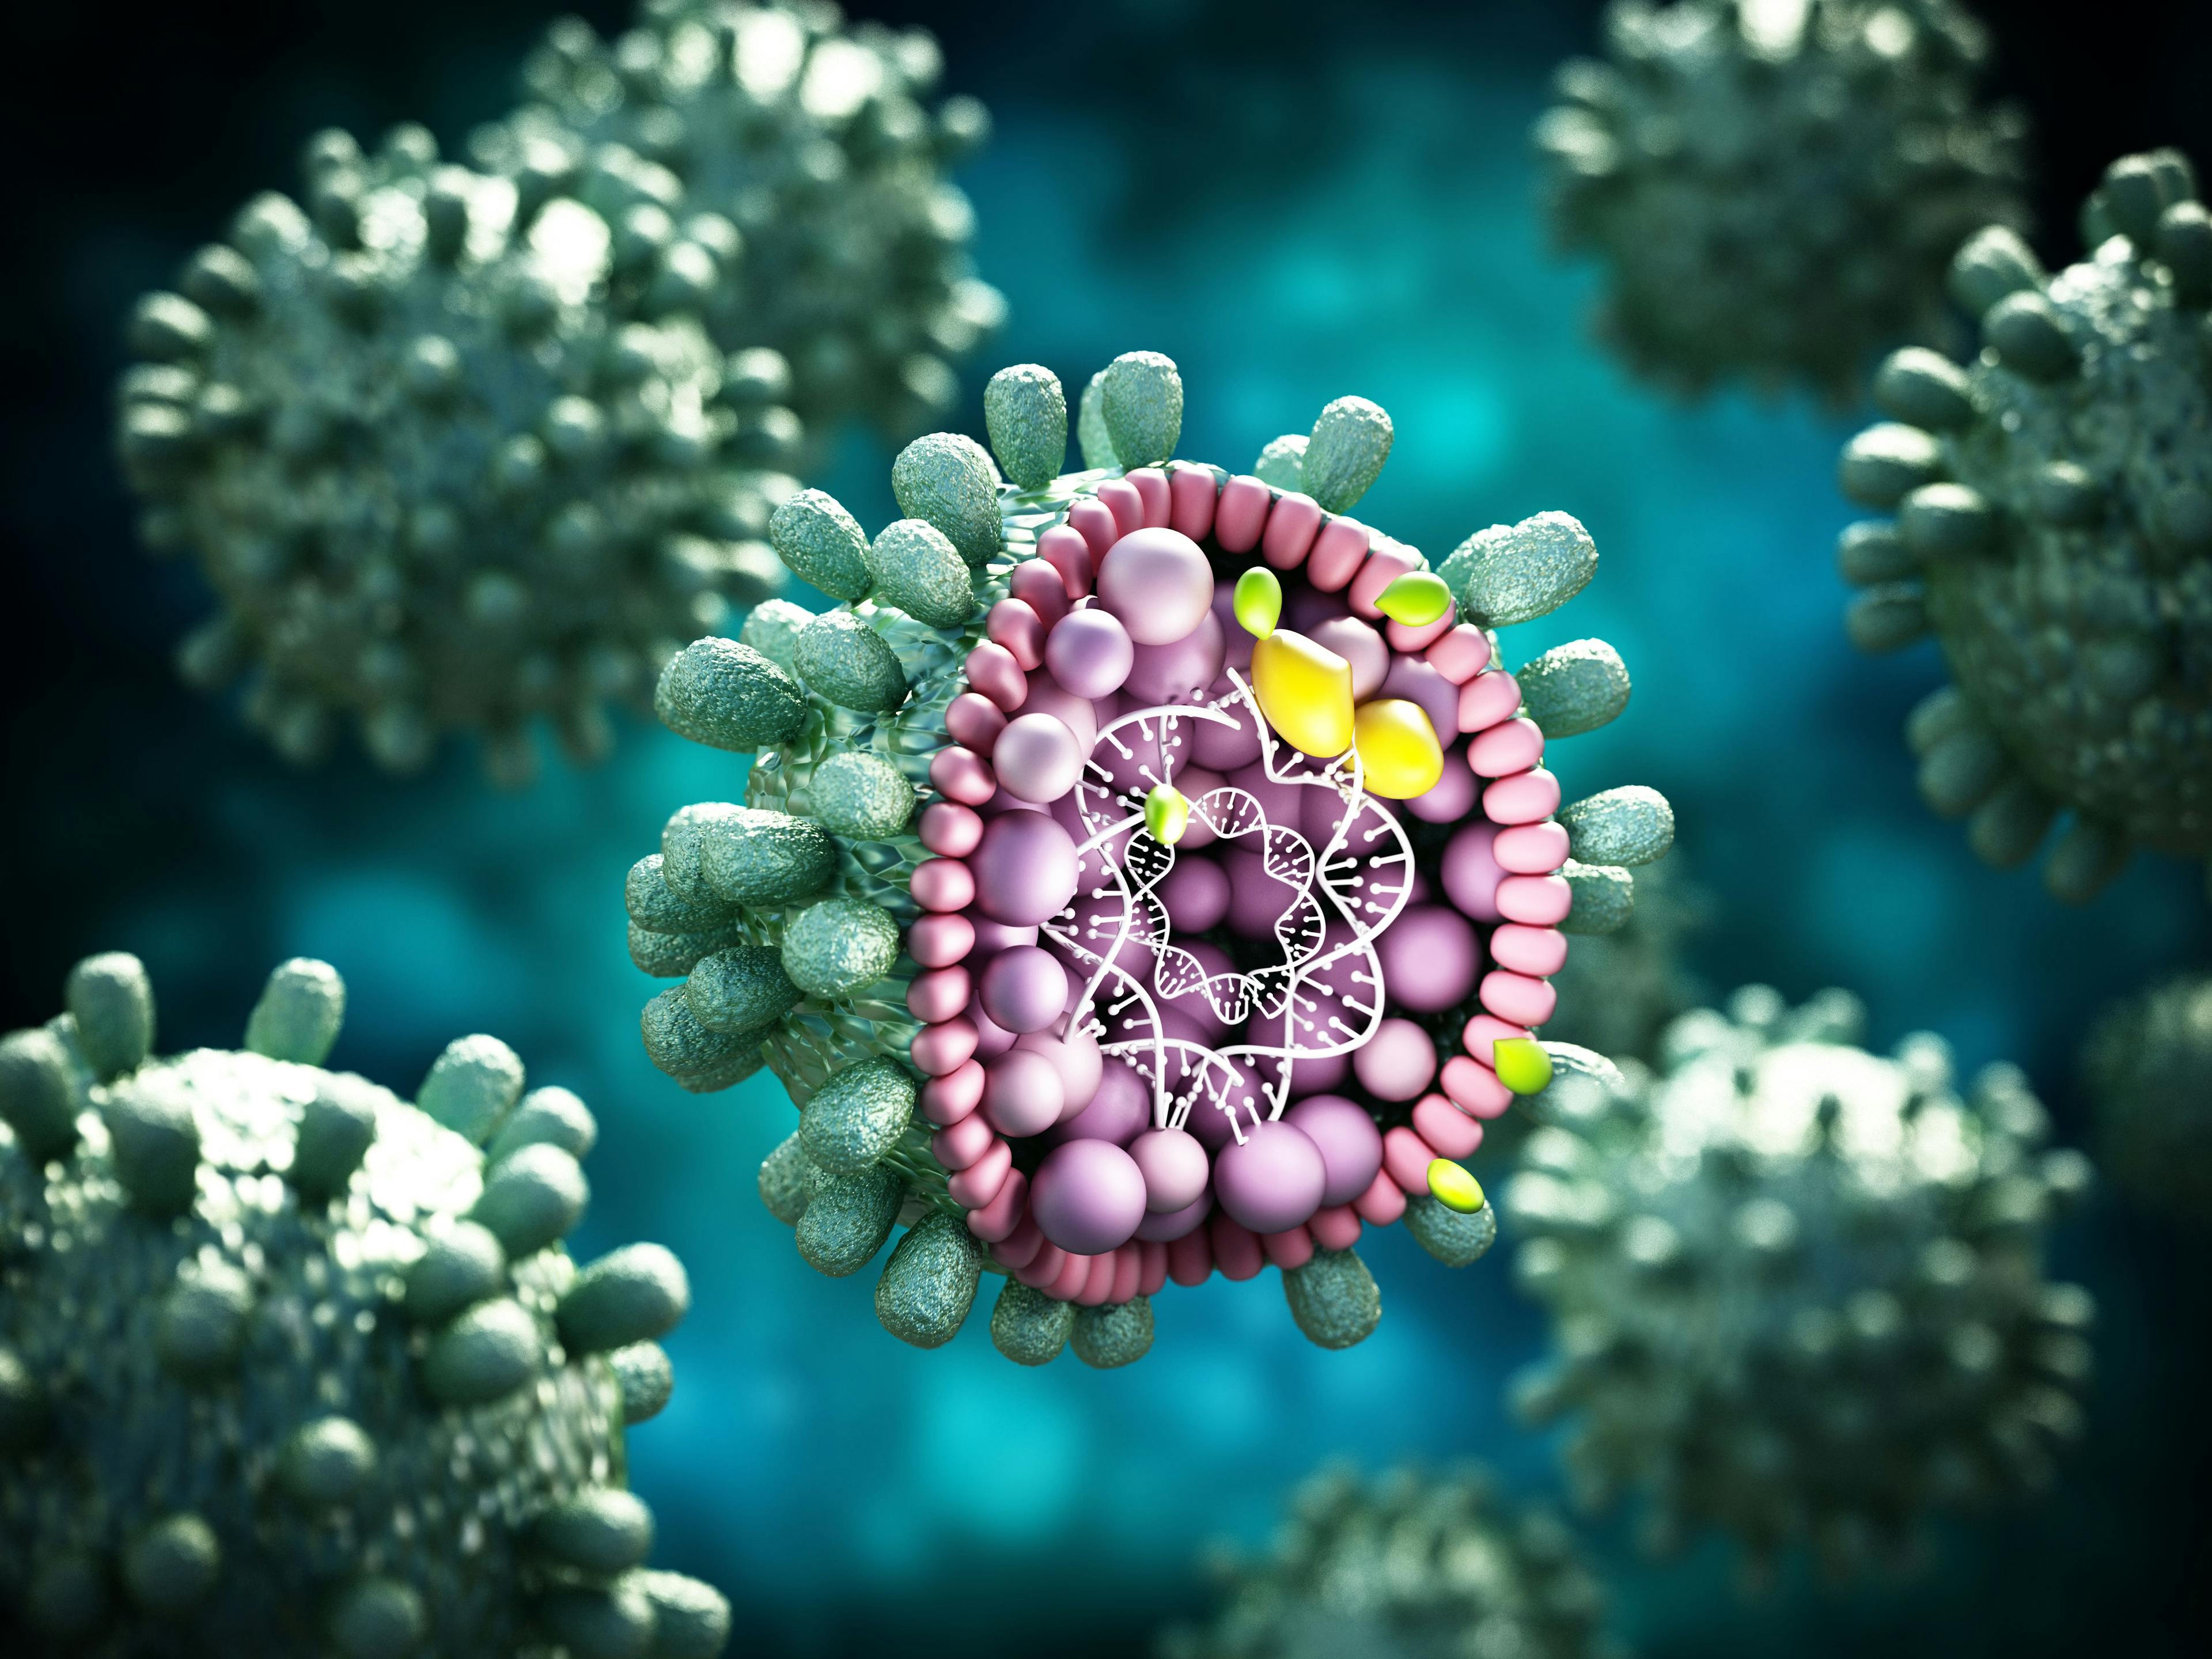 Therapies to reach a functional cure for hepatitis B virus may differ among the phases of hepatitis B, including new antiviral agents and immunomodulatory strategies, the study authors predicted. 